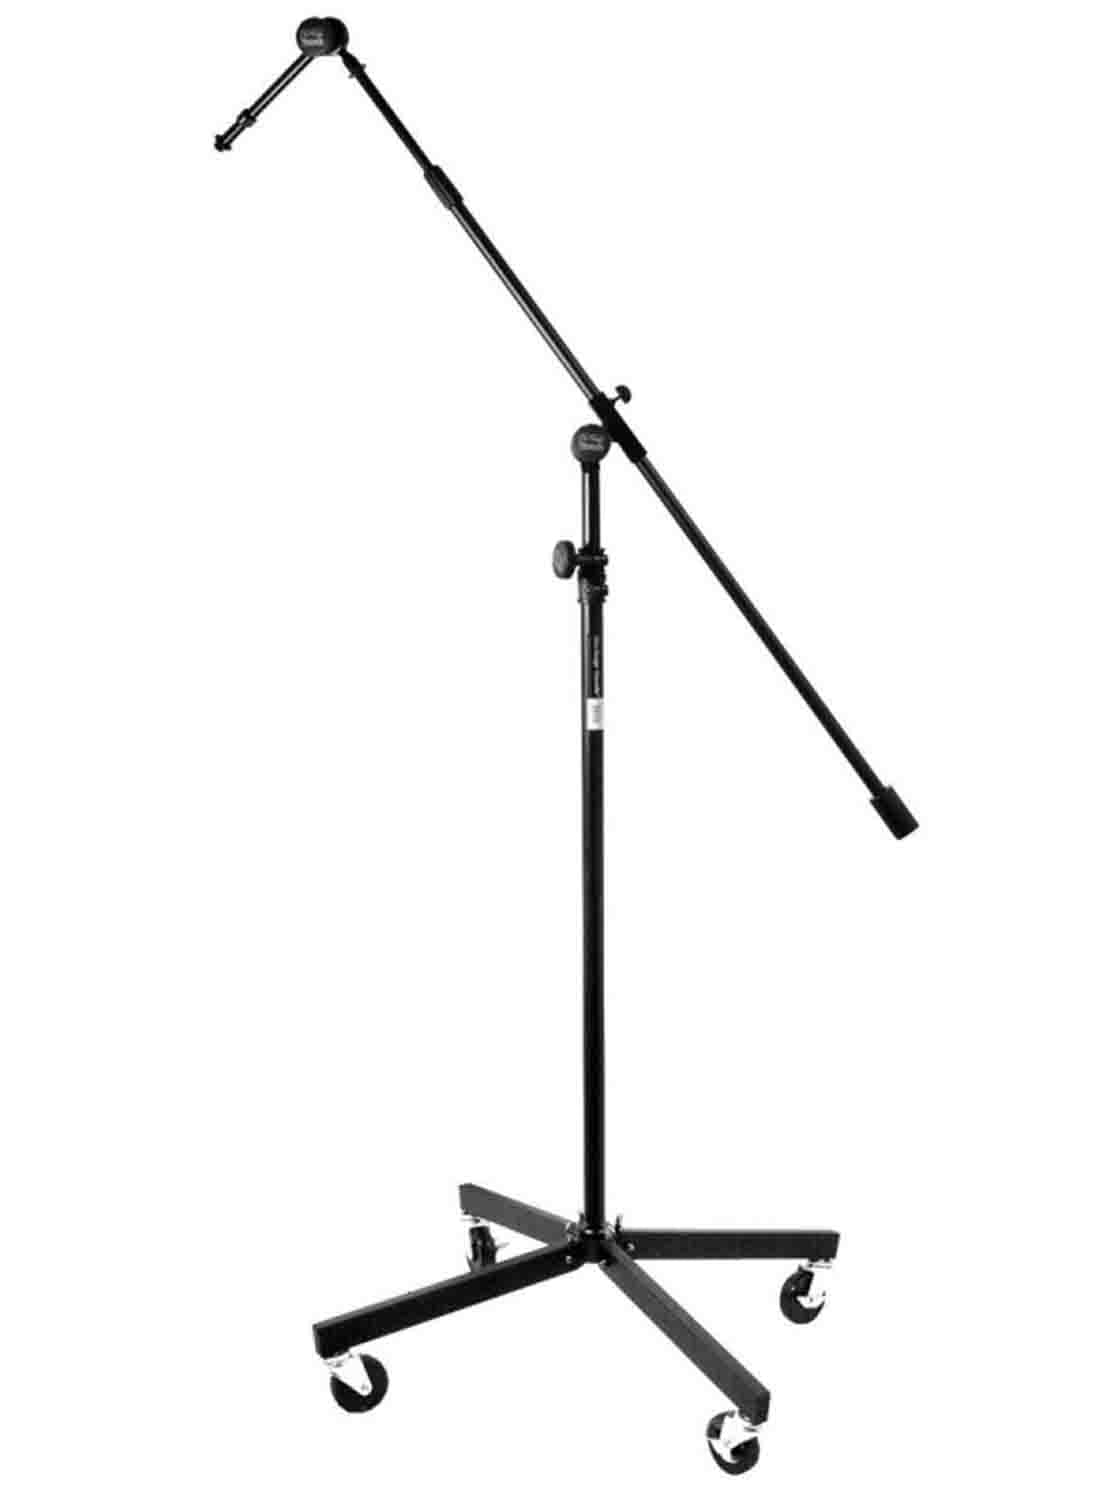 On Stage SB96+ Tripod Studio Mic Boom with 7" Mini Boom Extension and Casters - Hollywood DJ